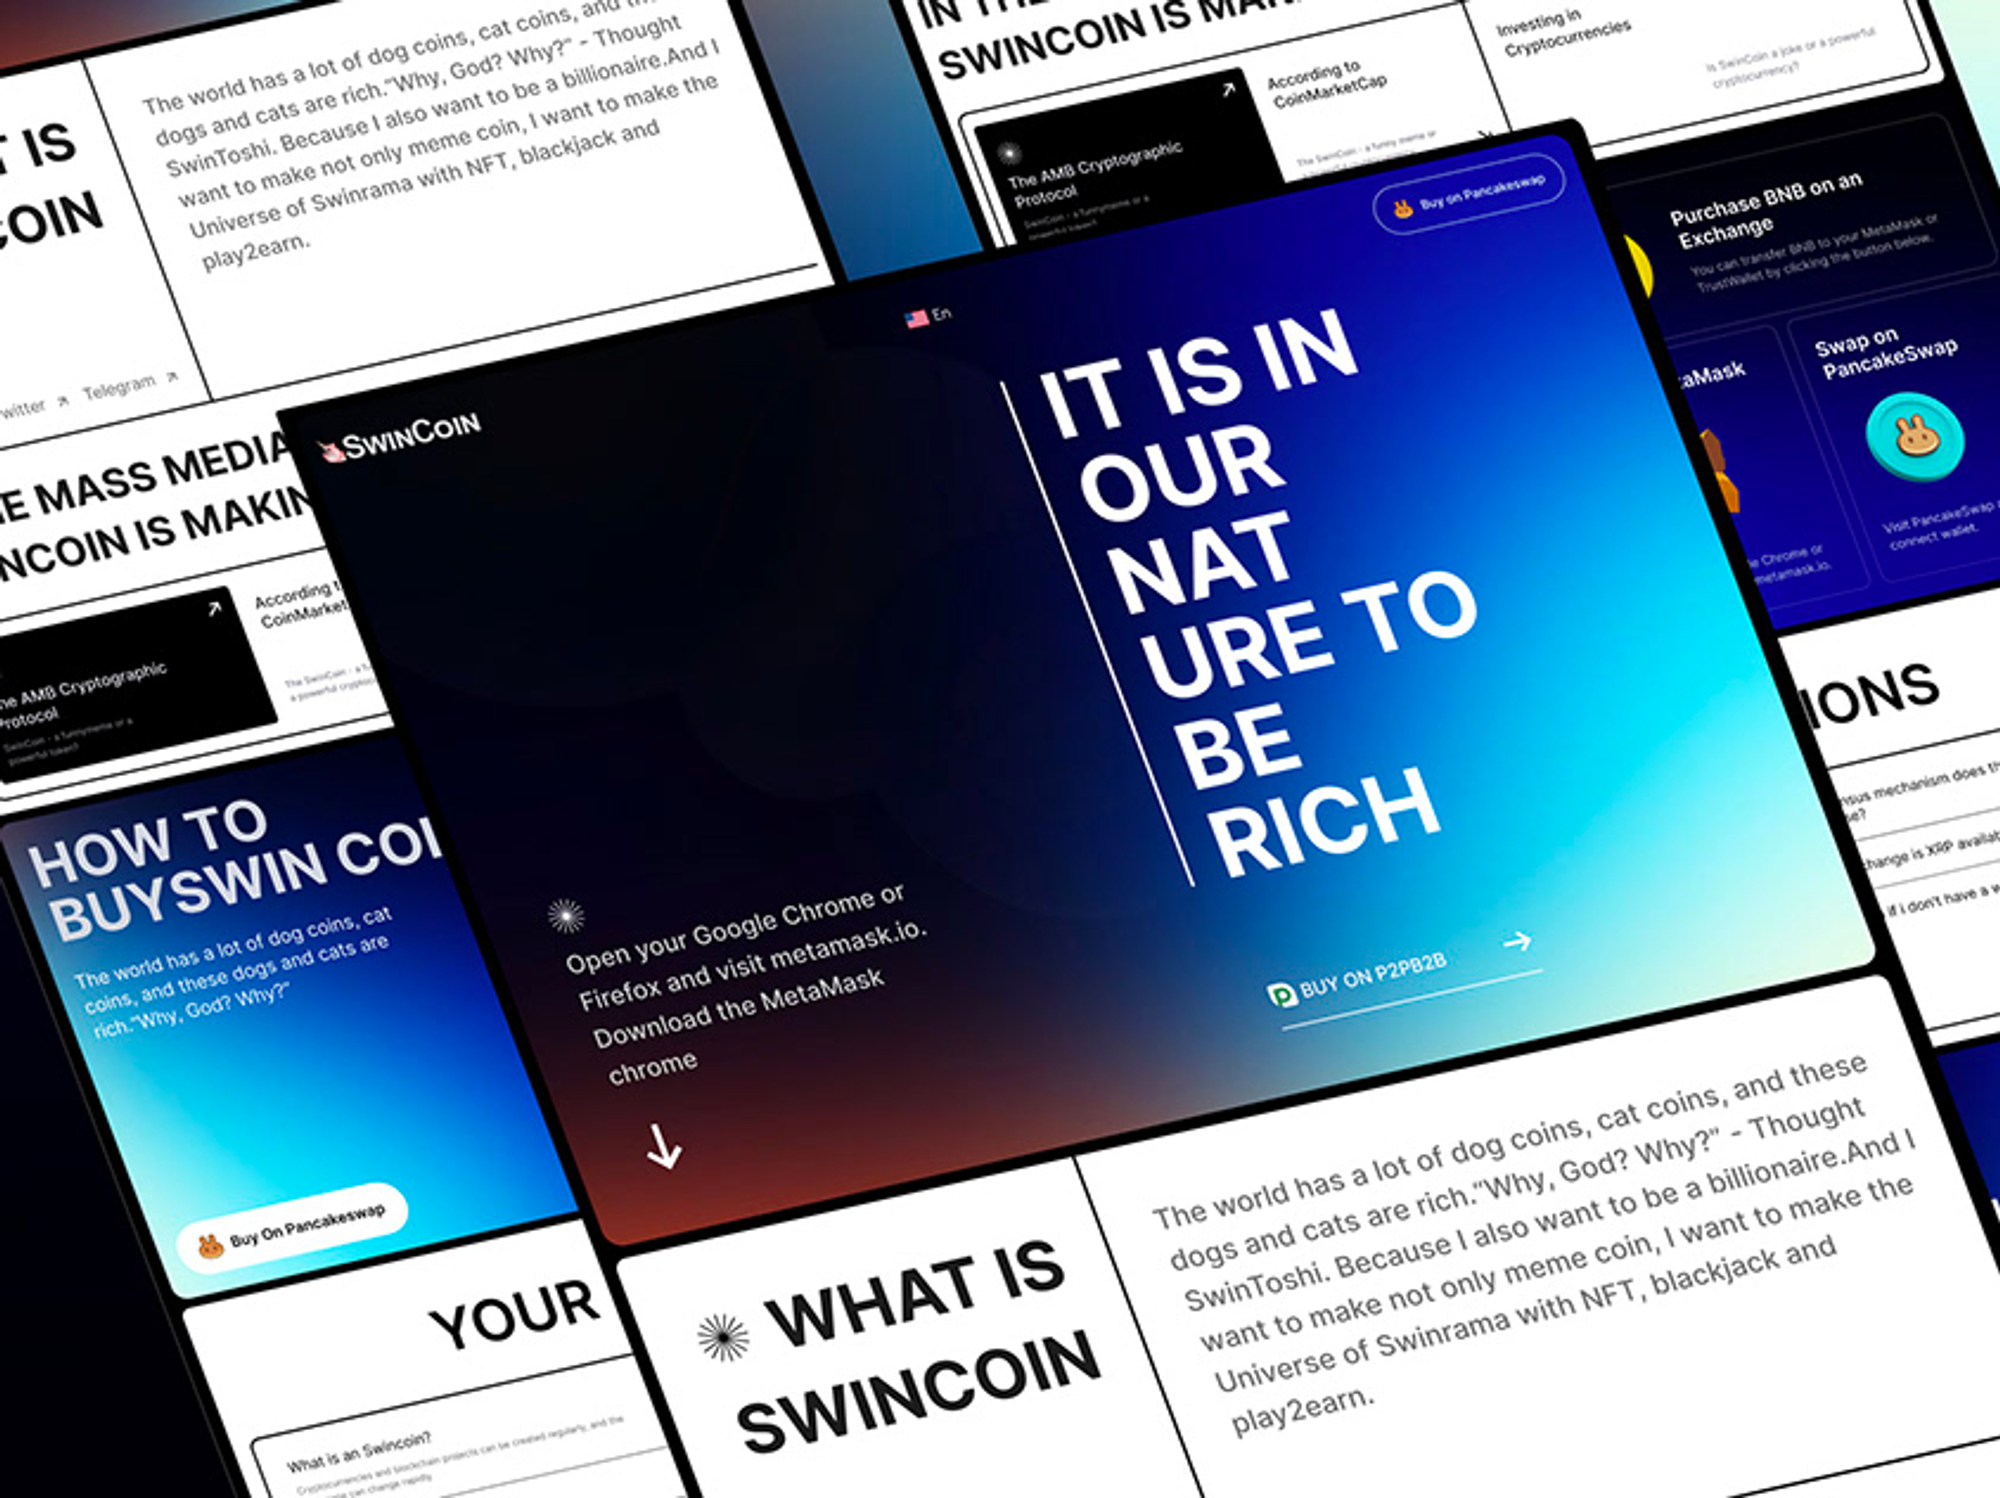 https://www.behance.net/gallery/185179943/Crypto-Coin-Landing-Page/modules/1046683629